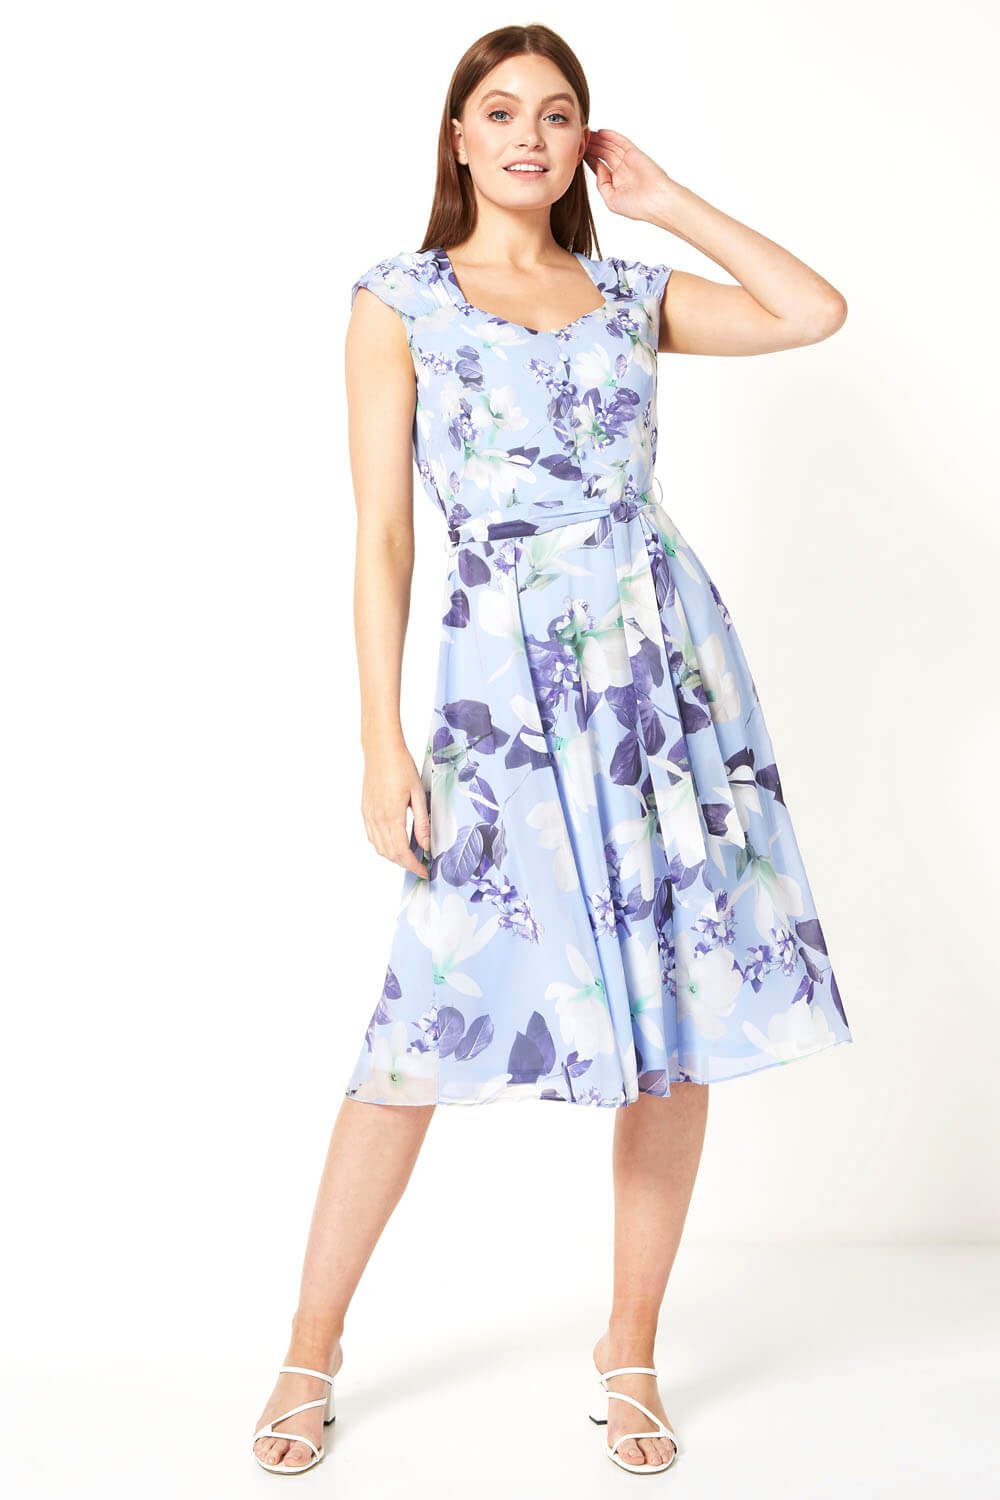 Lilac Floral Fit and Flare Belted Dress, Image 2 of 5